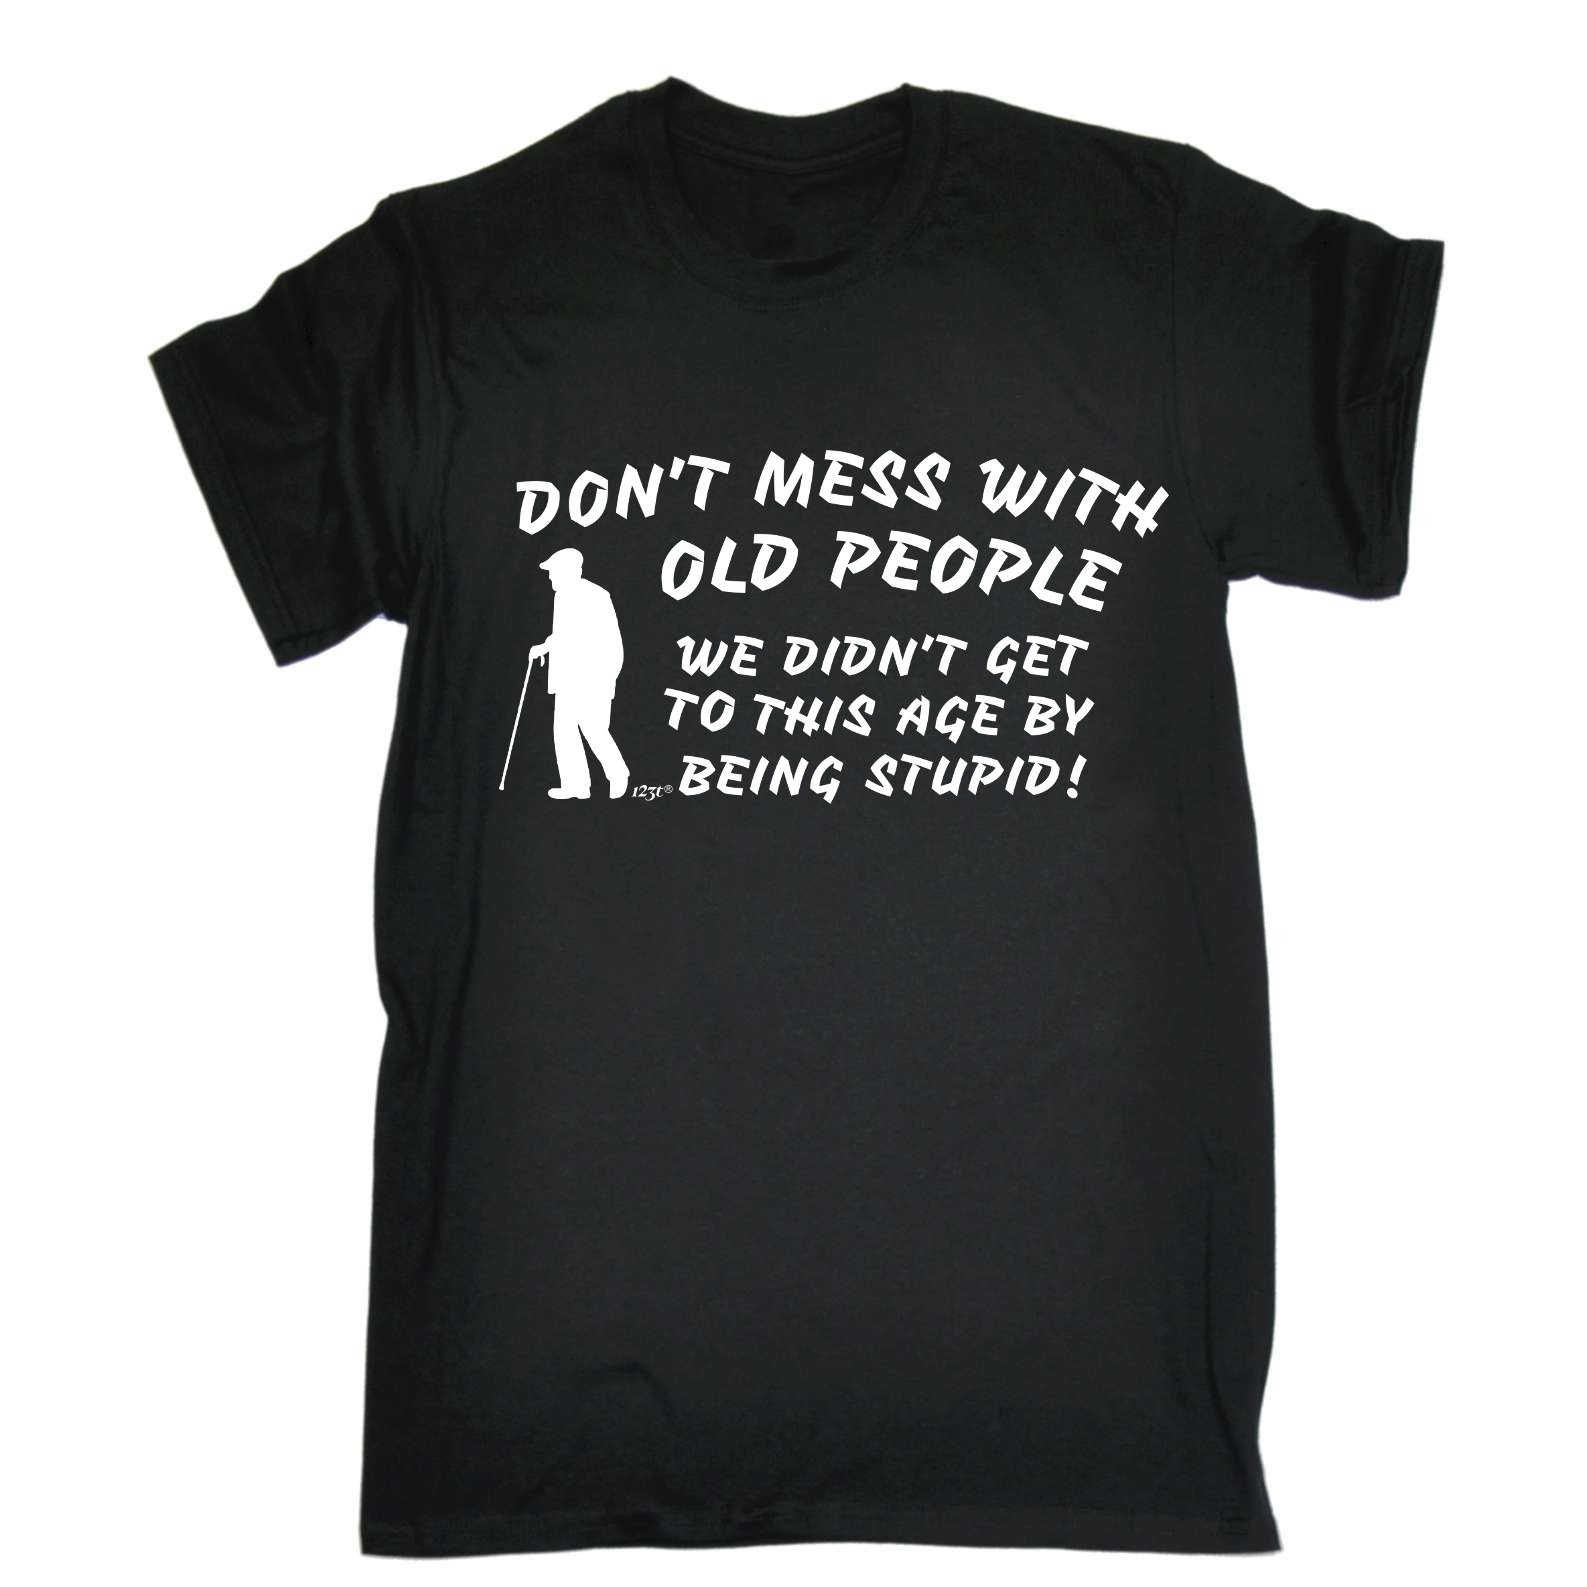 Funny T Shirt Dont Mess With Old People Birthday Joke tee Gift Novelty ...